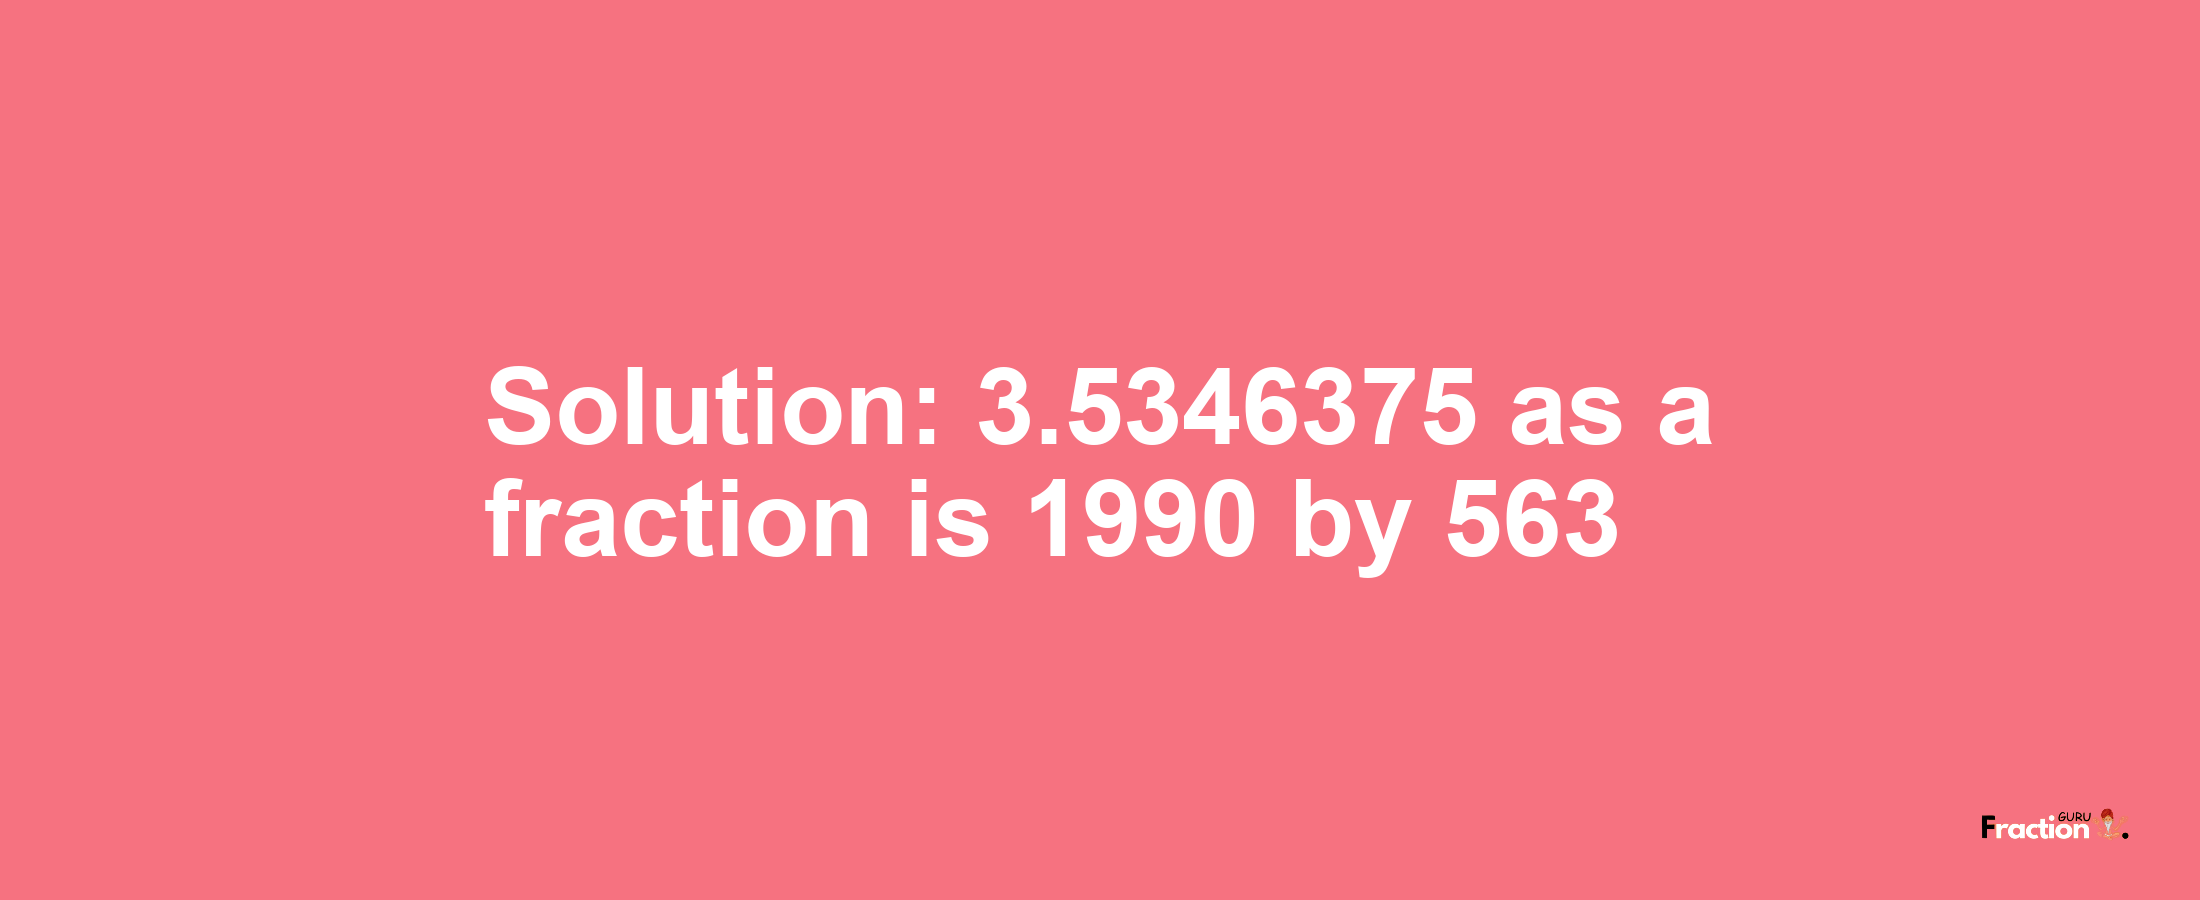 Solution:3.5346375 as a fraction is 1990/563